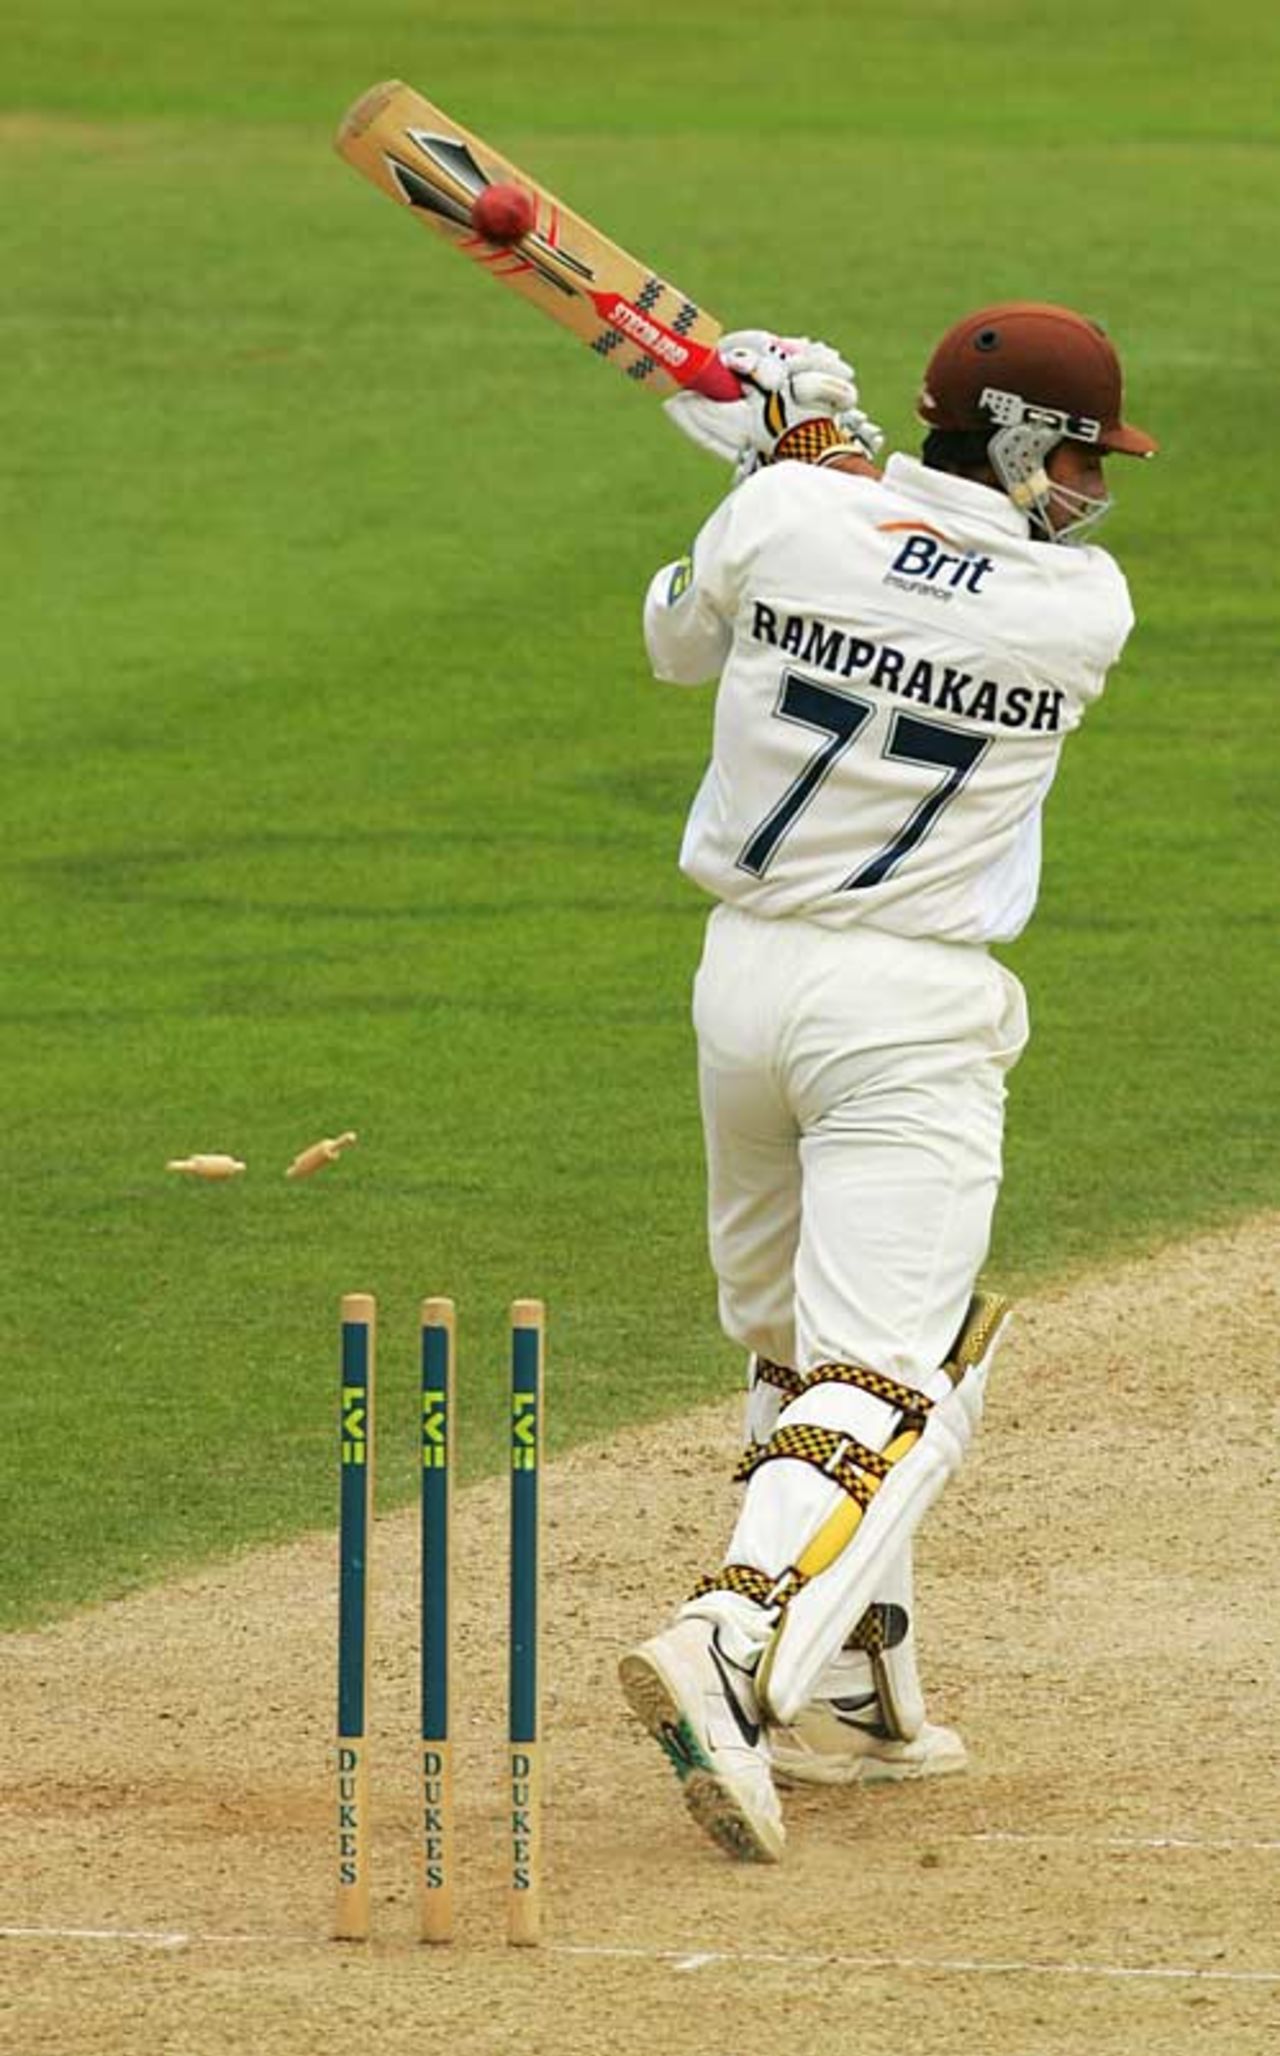 Mark Ramprakash is bowled as wickets tumble at The Oval, Surrey v Durham, County Championship, The Oval, July 8, 2007